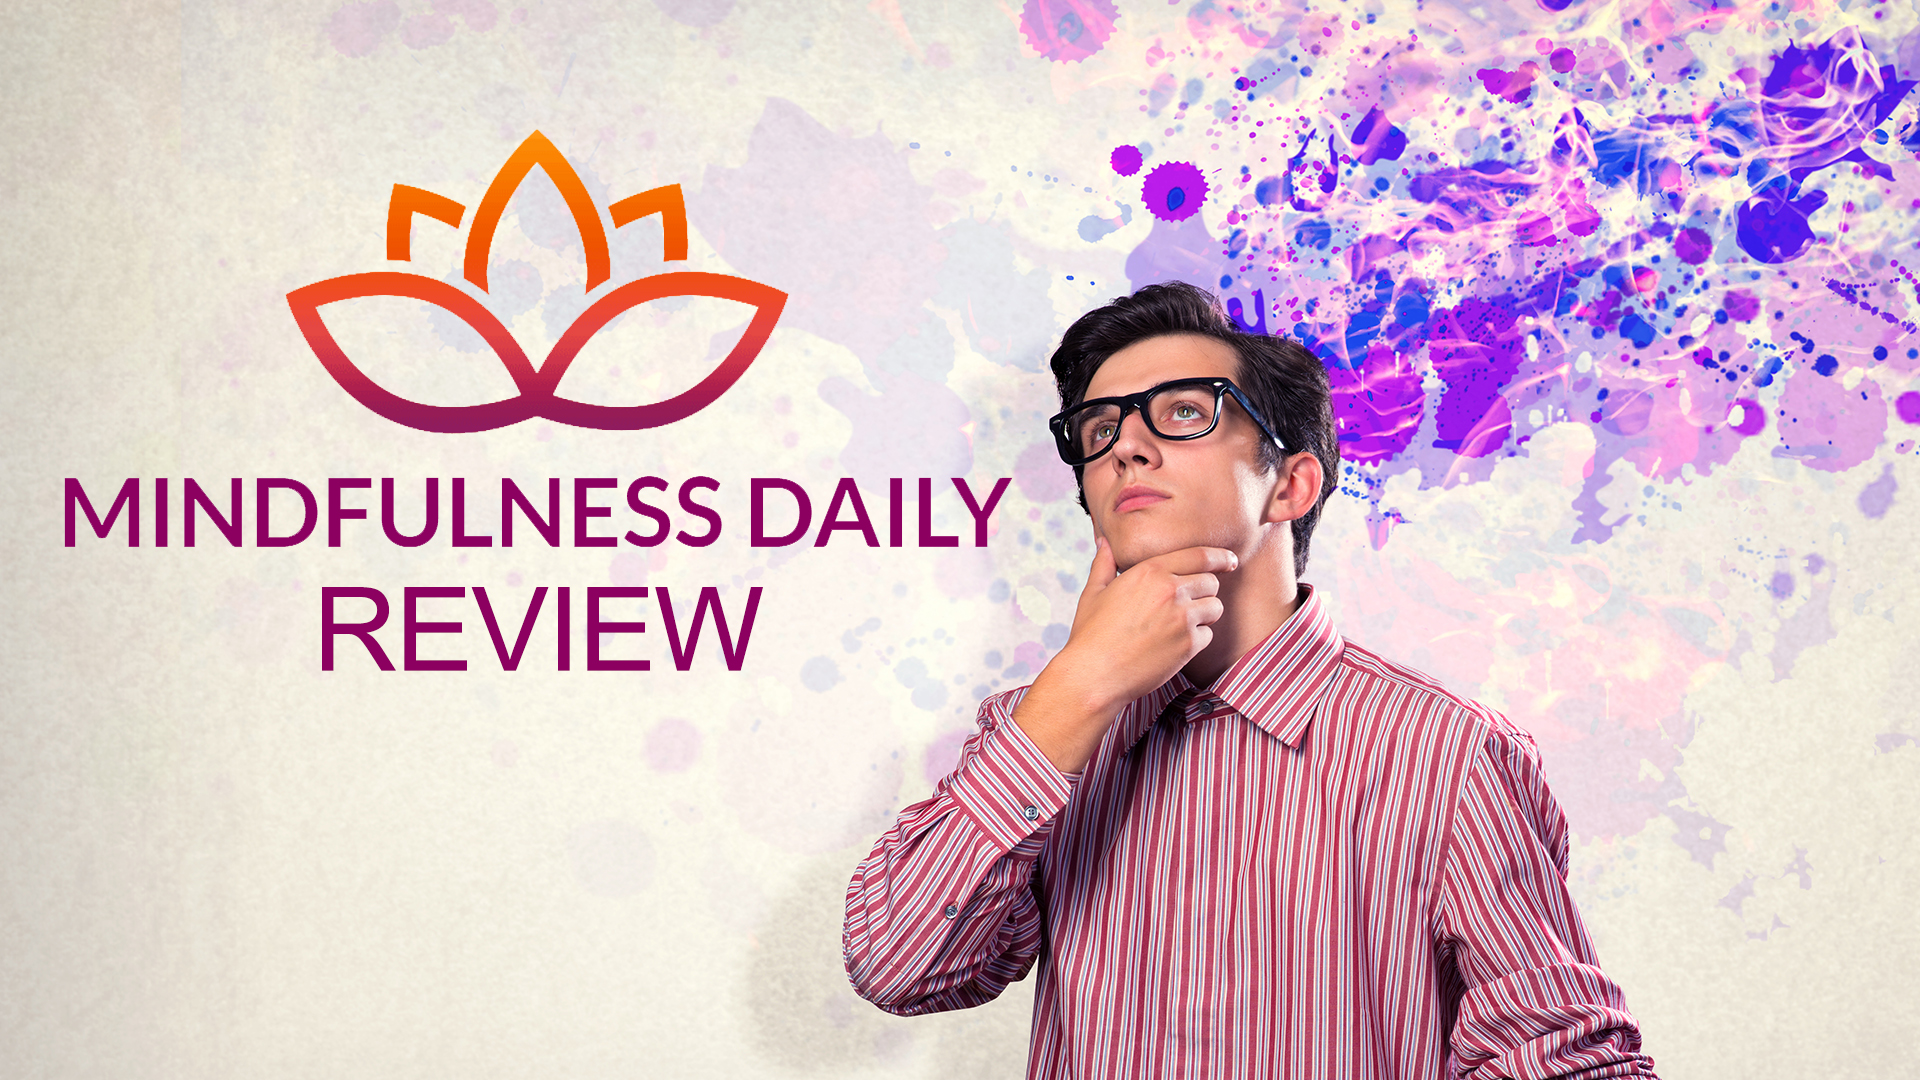 More information about "Mindfulness Daily: get started with this easy-to-use app"